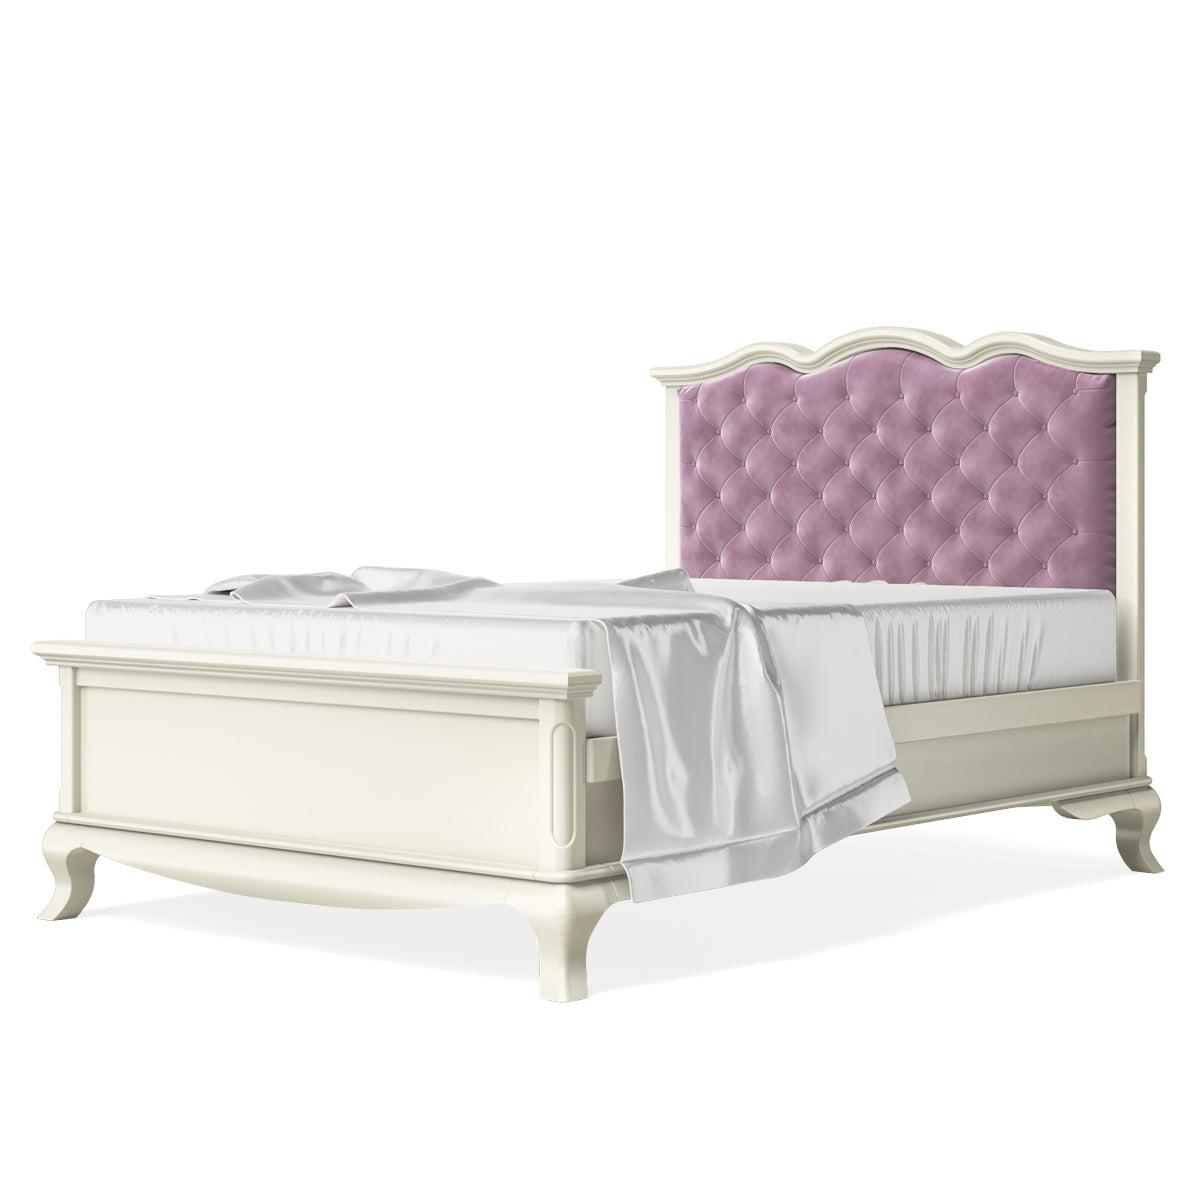 Full Bed Tufted Headboard Bianco Satinato with Pink Velvet